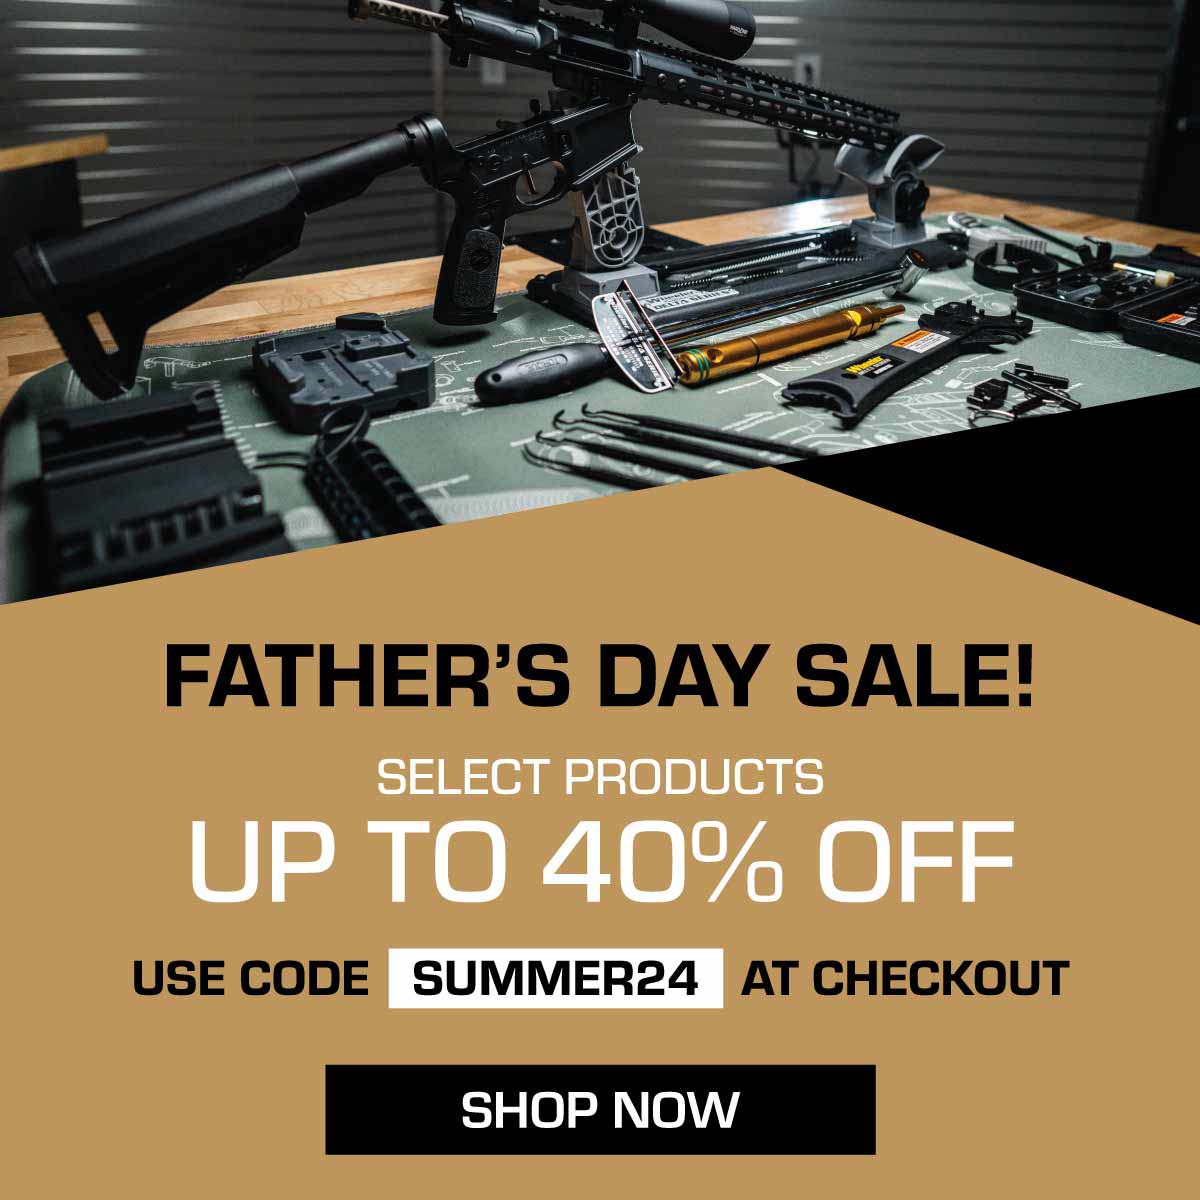 Father's day sale! use code summer24 at checkout for up to 40% off